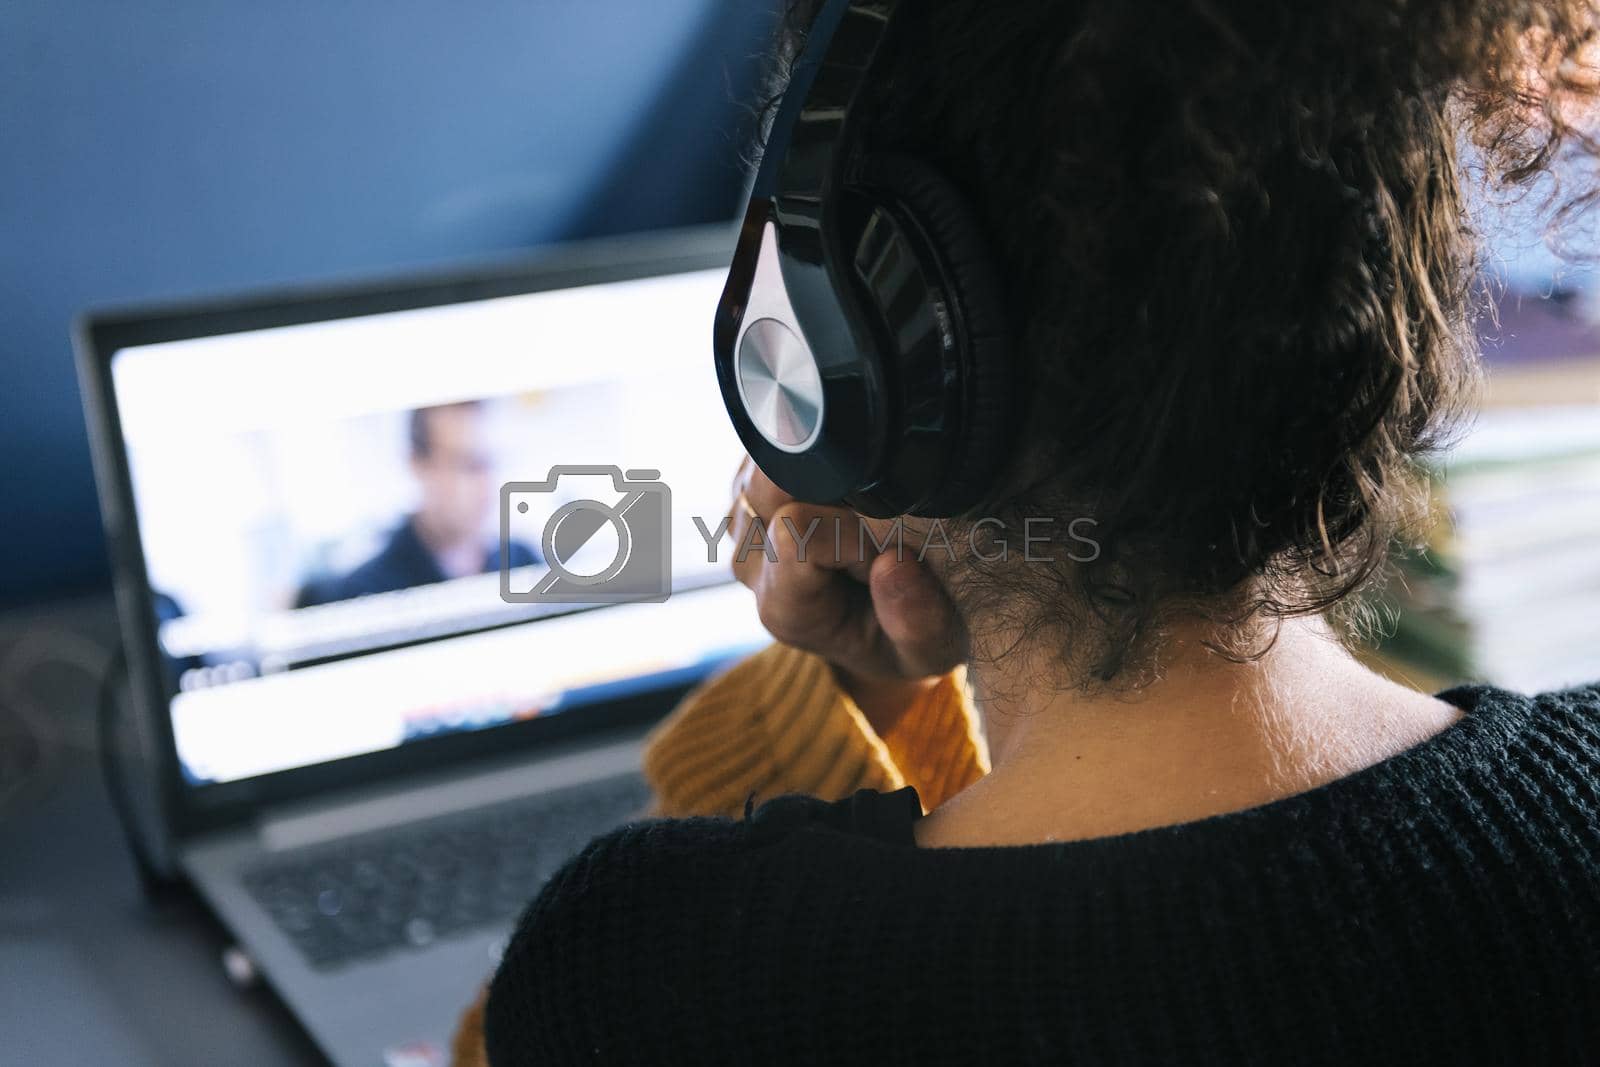 Royalty free image of woman with headphones watching a movie on laptop by raulmelldo